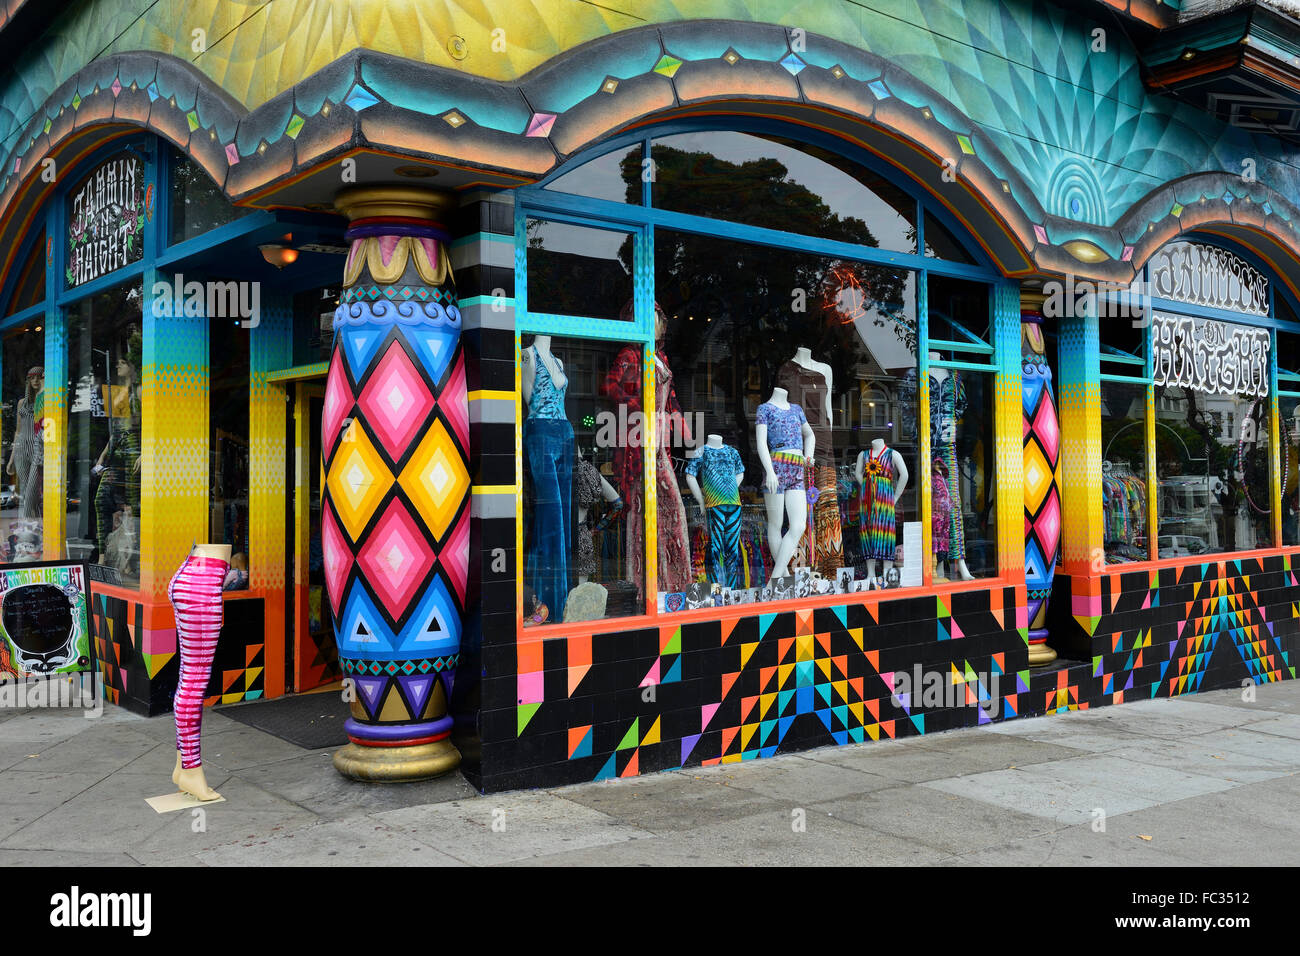 Colourful storefront in Haight Ashbury district of San Francisco, California, USA Stock Photo